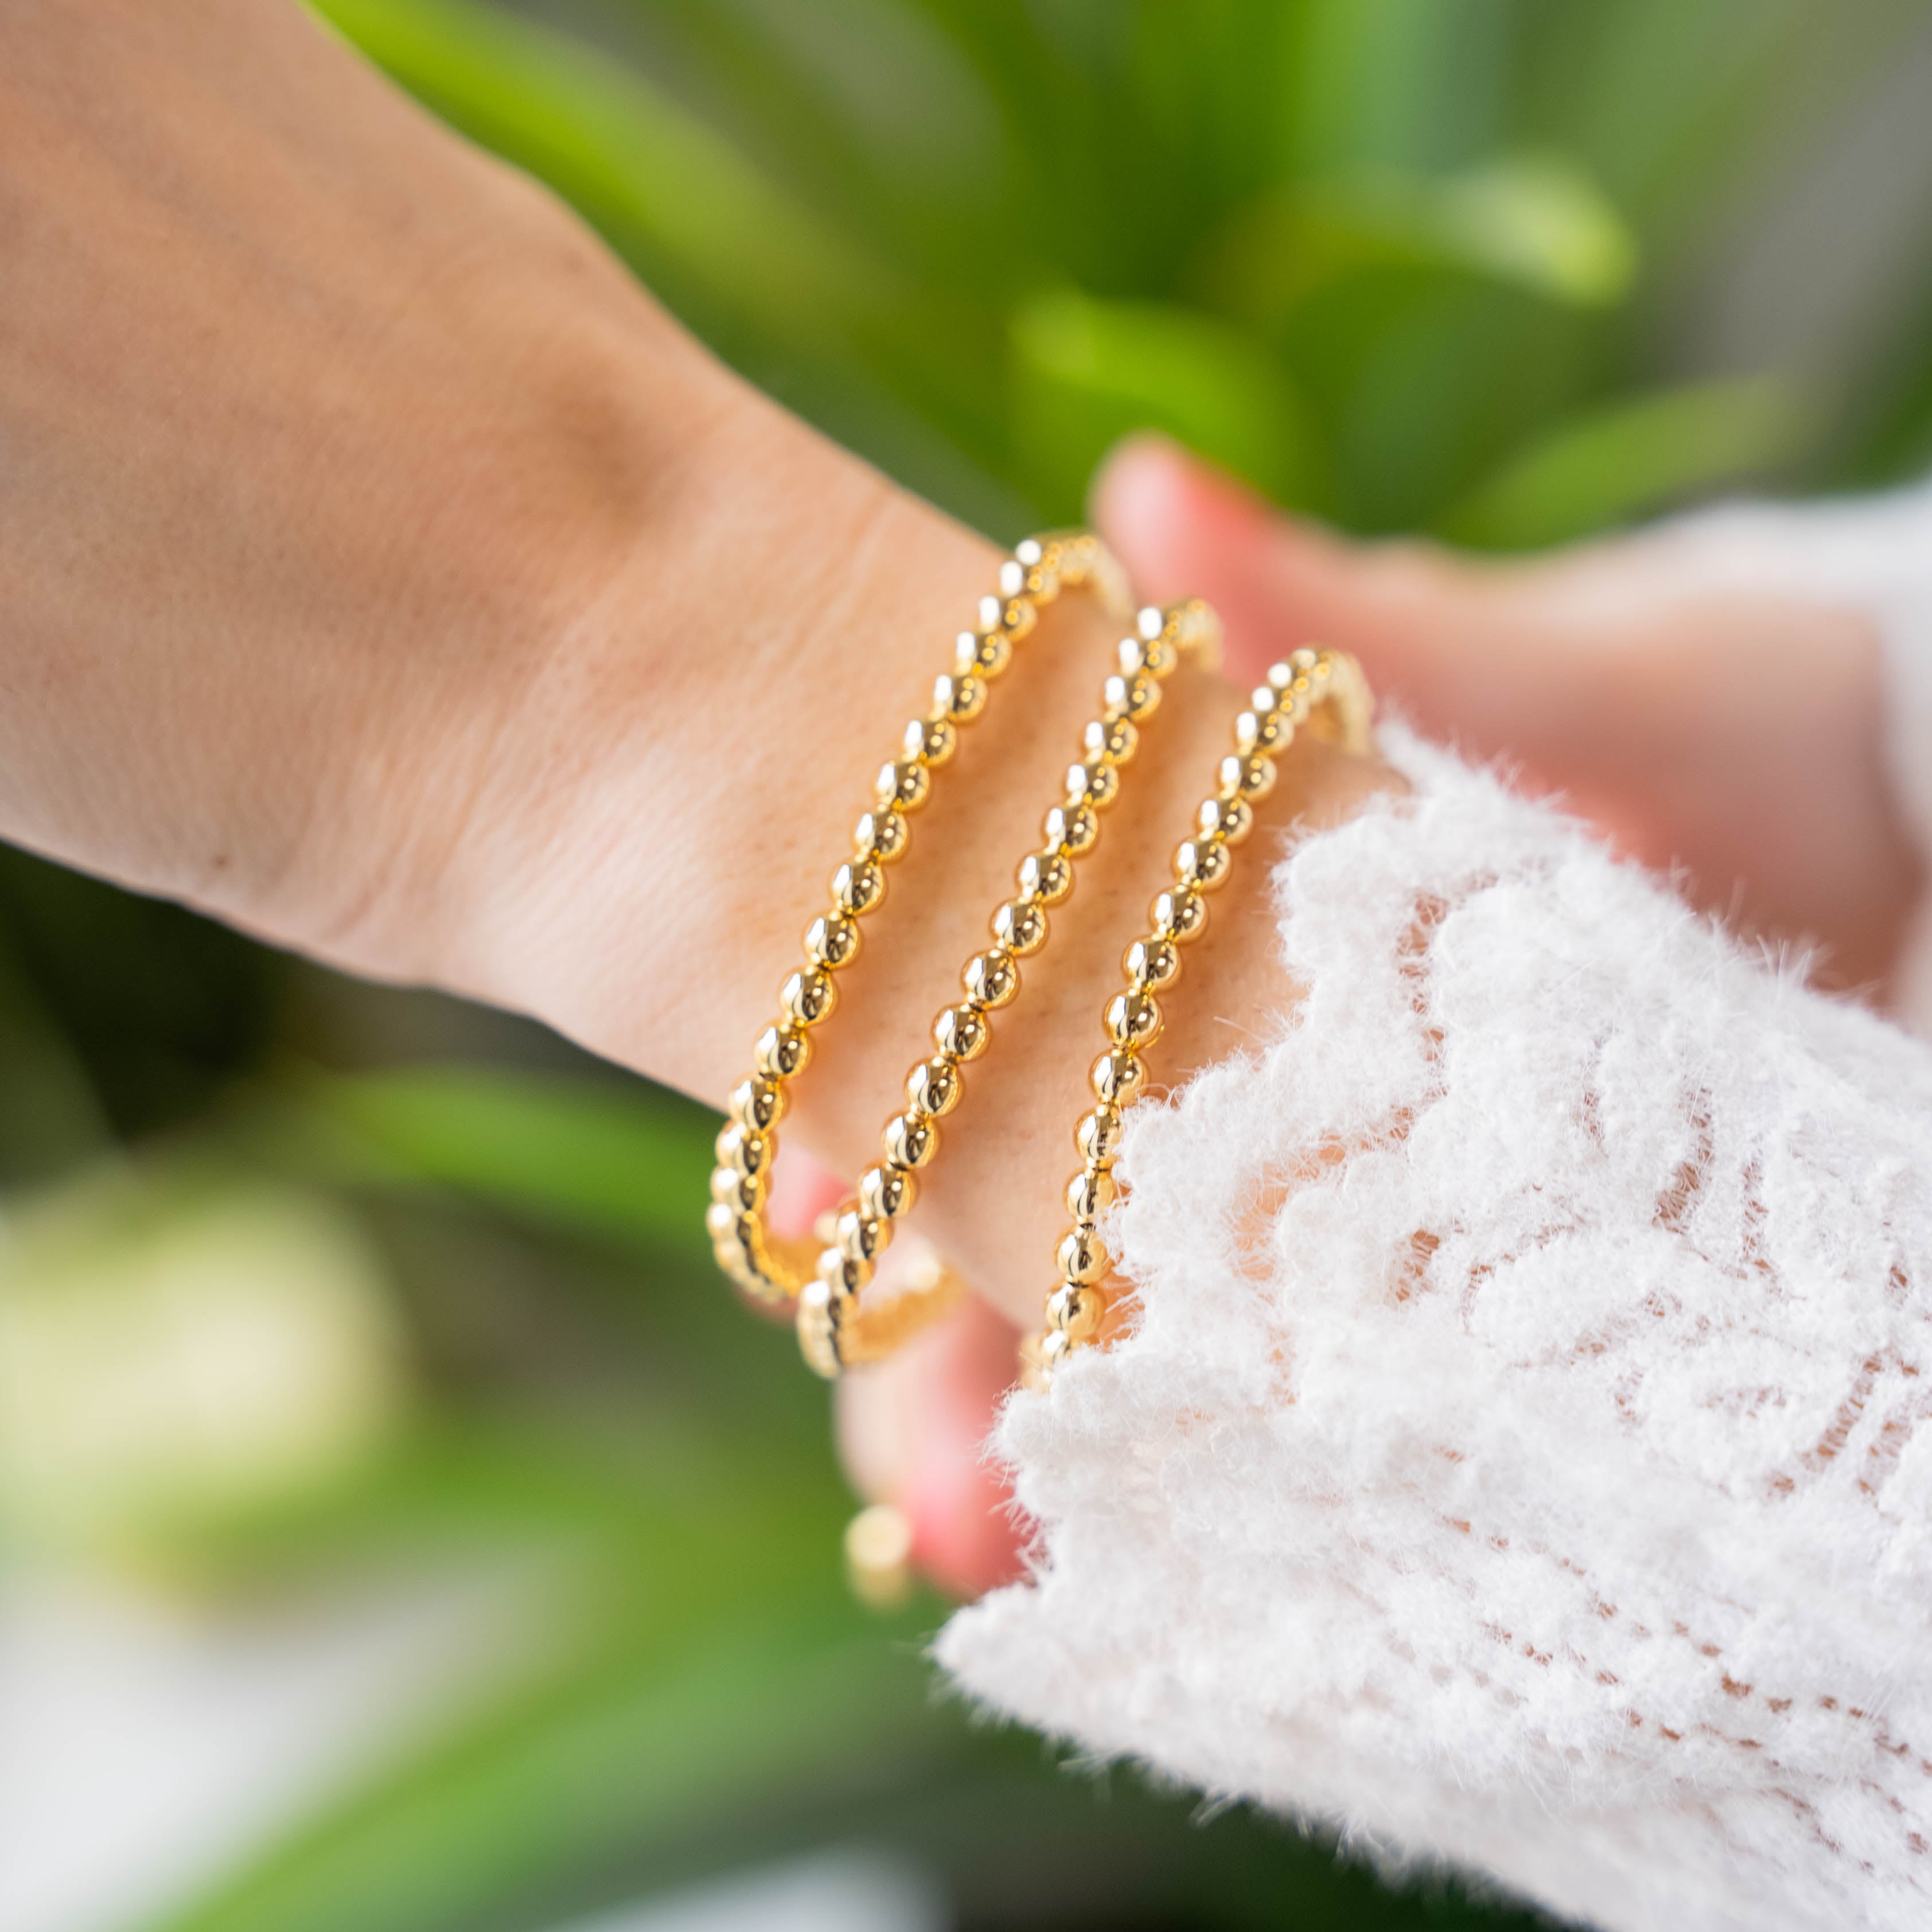 a woman's hand holding a gold beaded bracelet